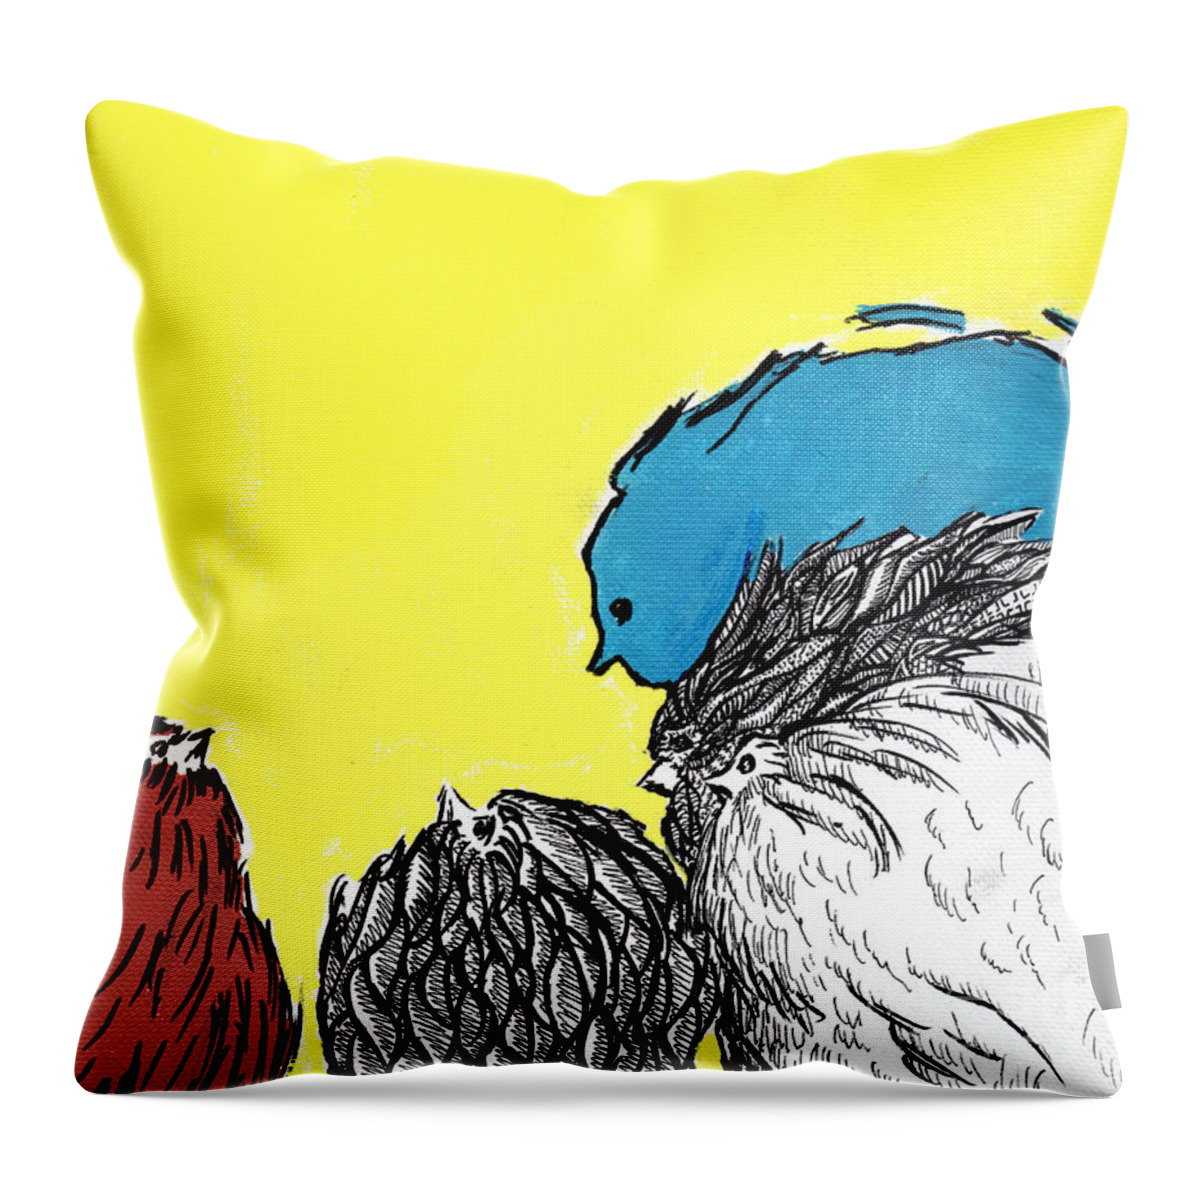 Chickens Throw Pillow featuring the painting Chickens One by Jason Tricktop Matthews